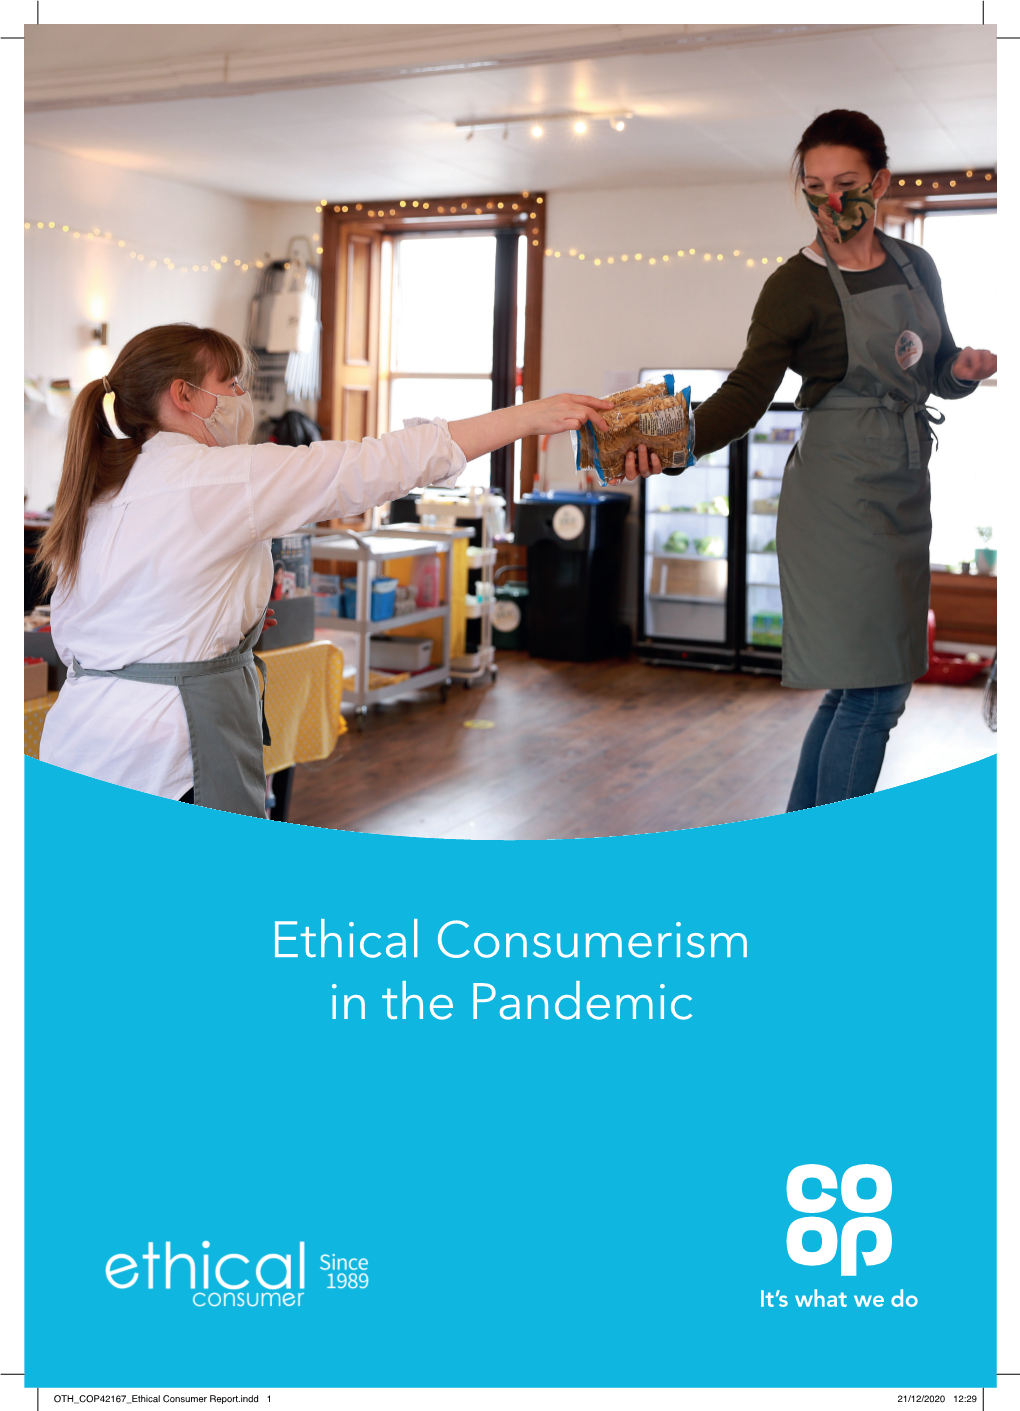 Ethical Consumerism in the Pandemic